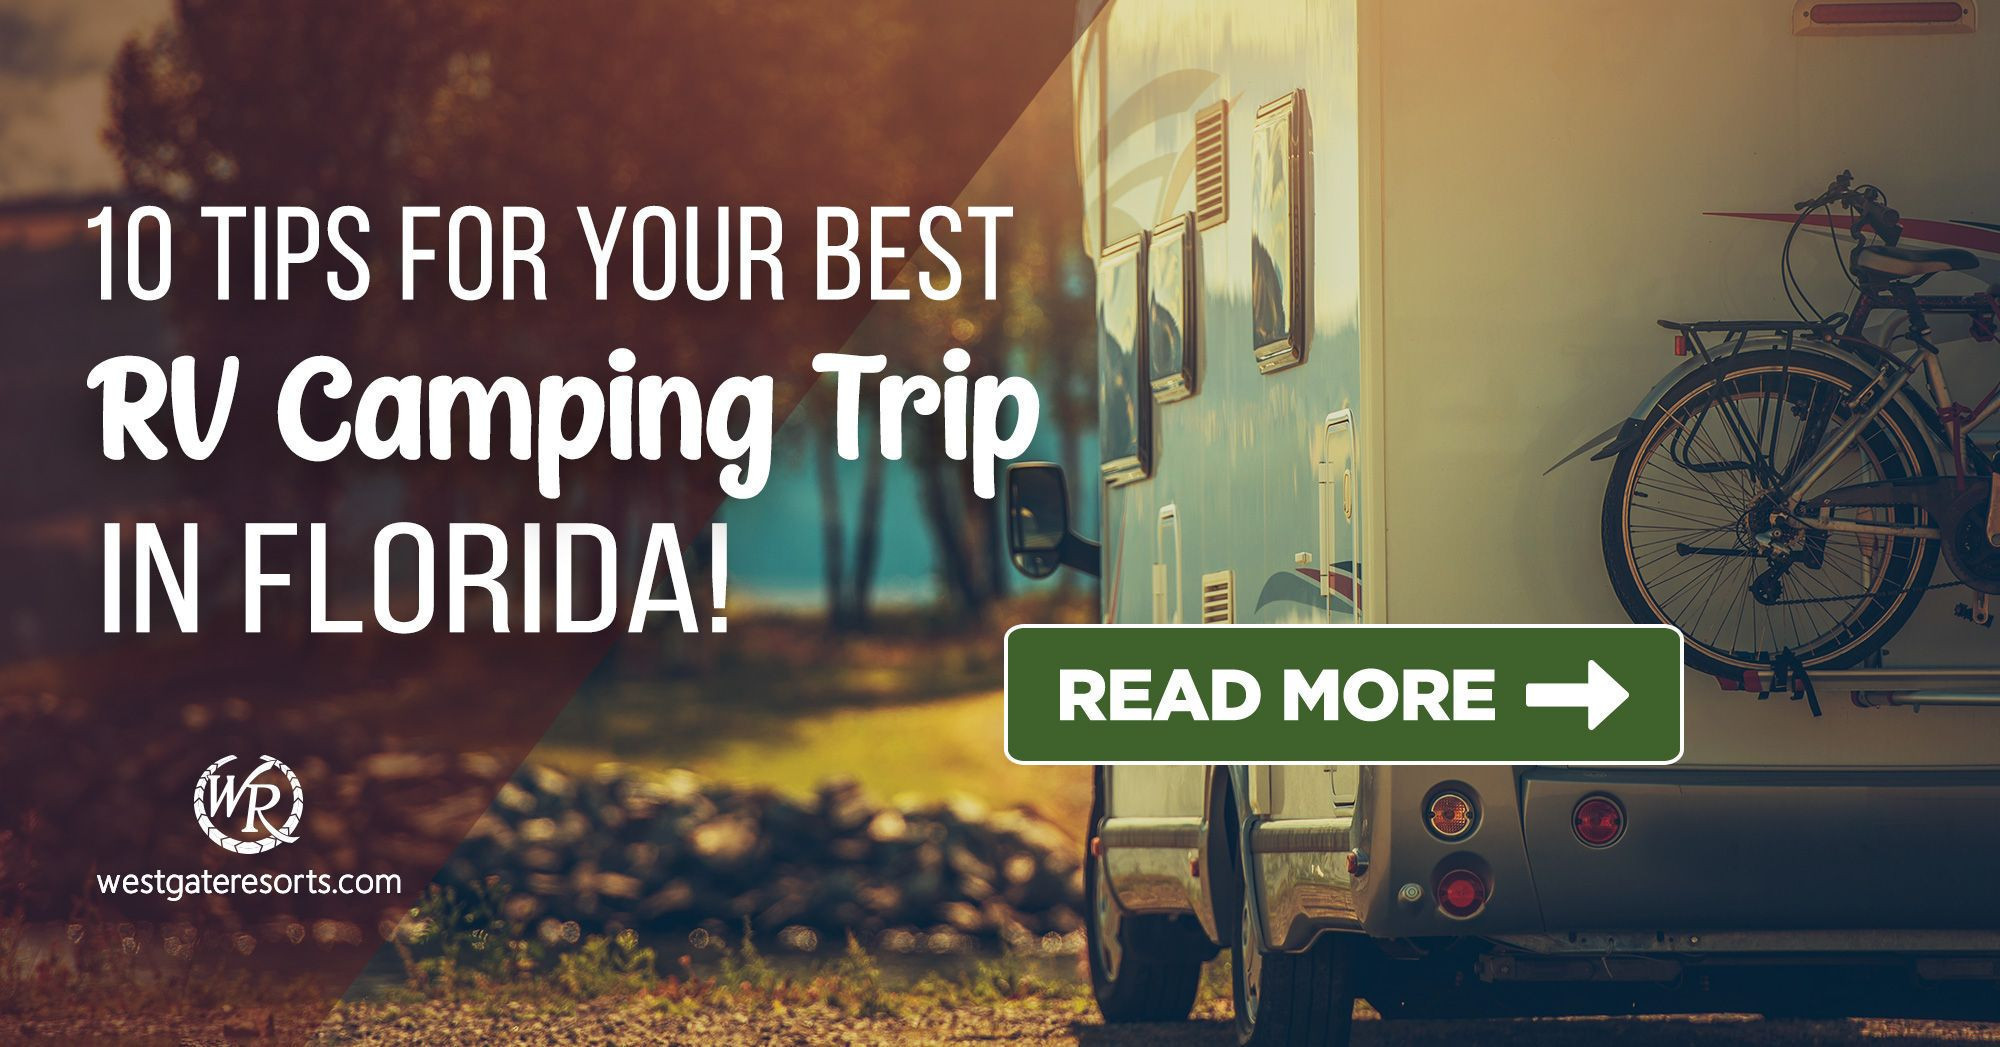 10 Tips for Your Best RV Camping Trip in Florida!